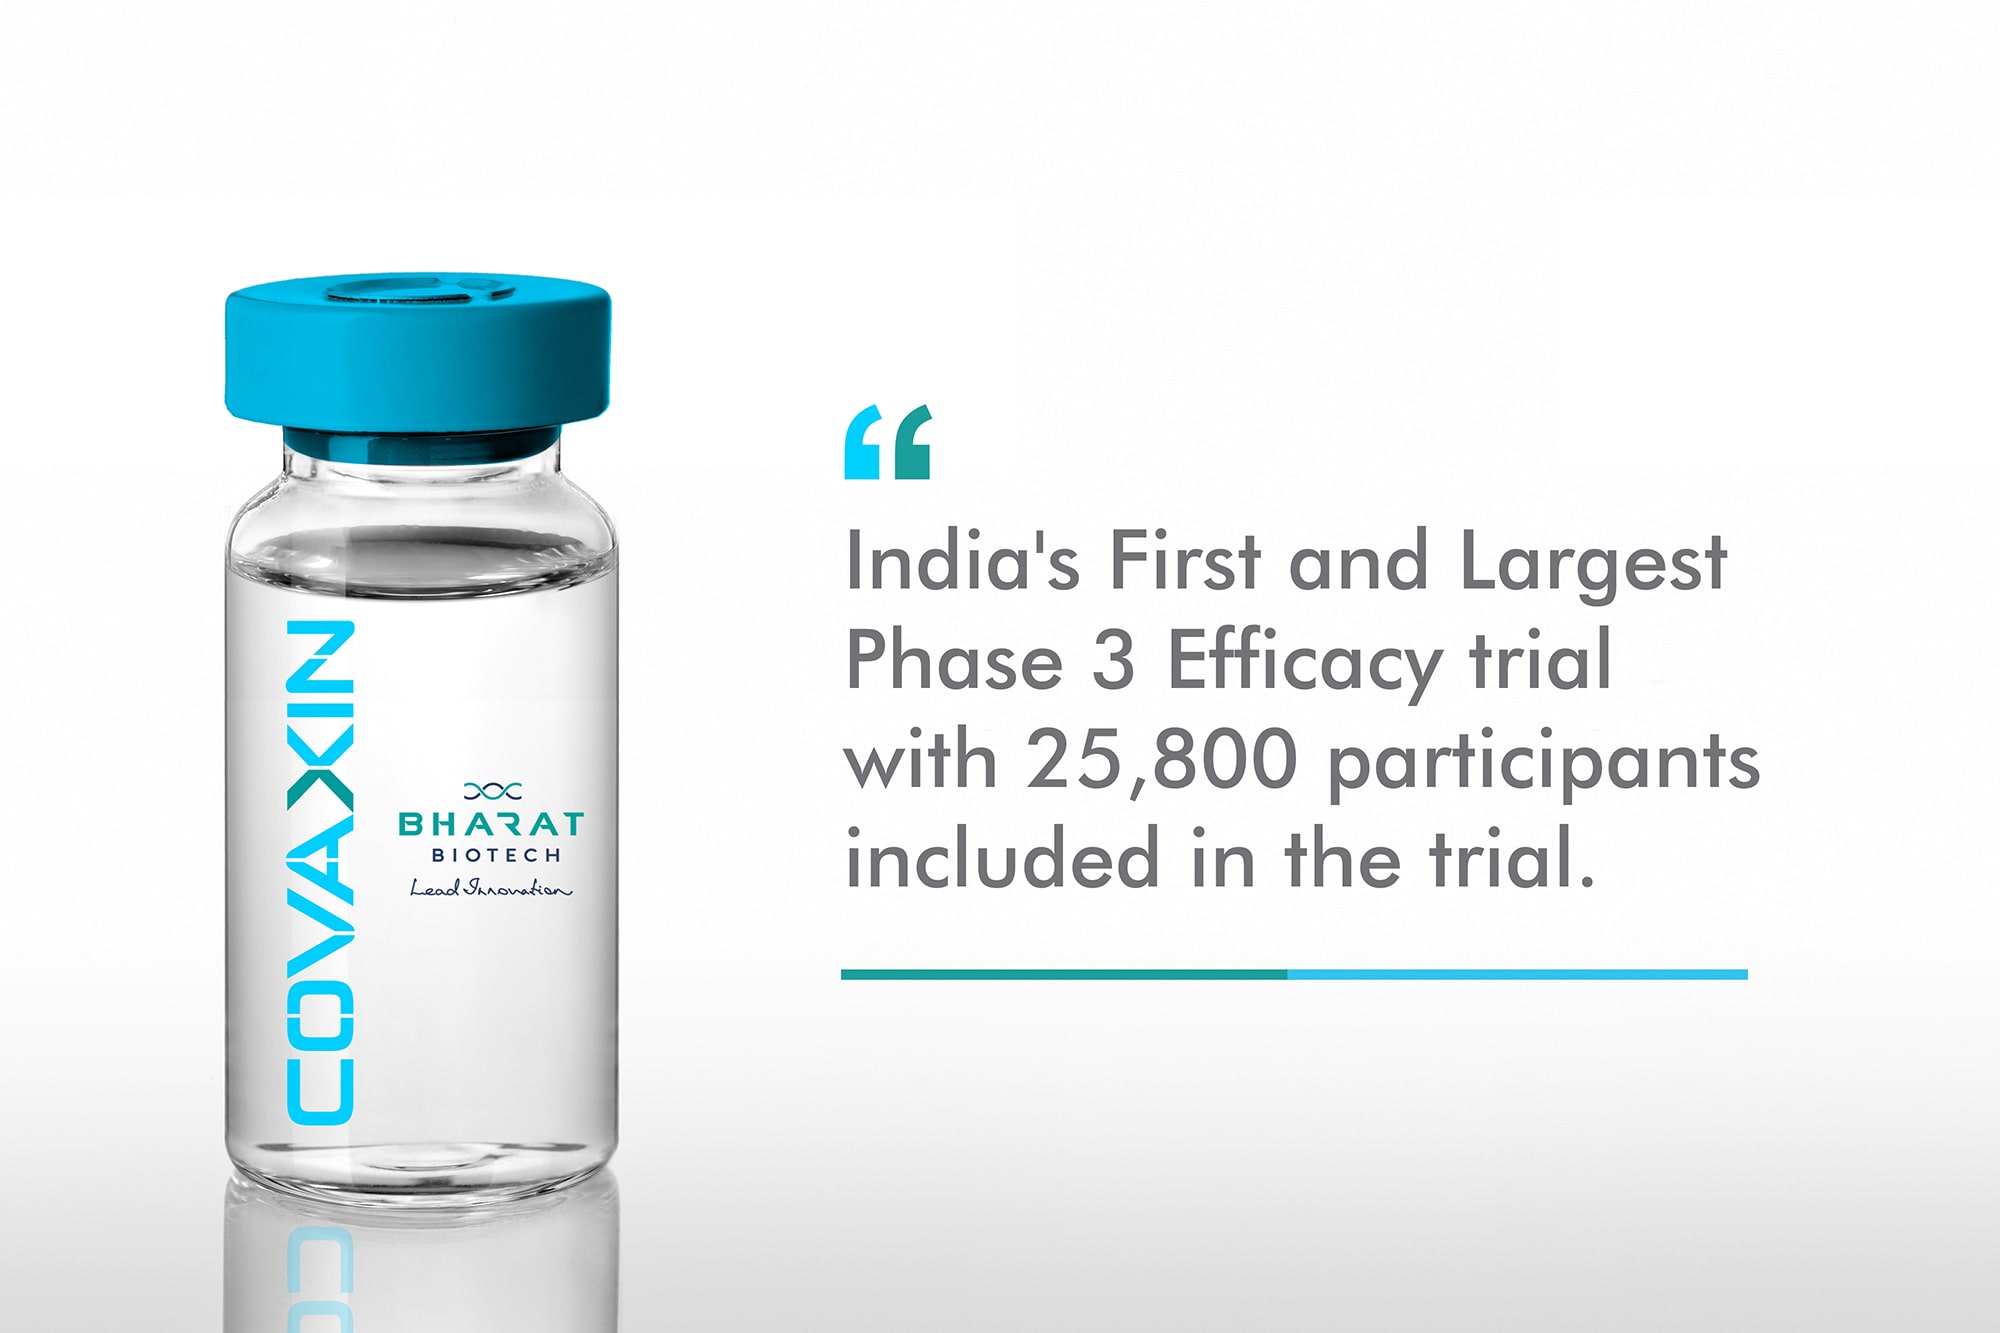 Covaxin phase 3 trials